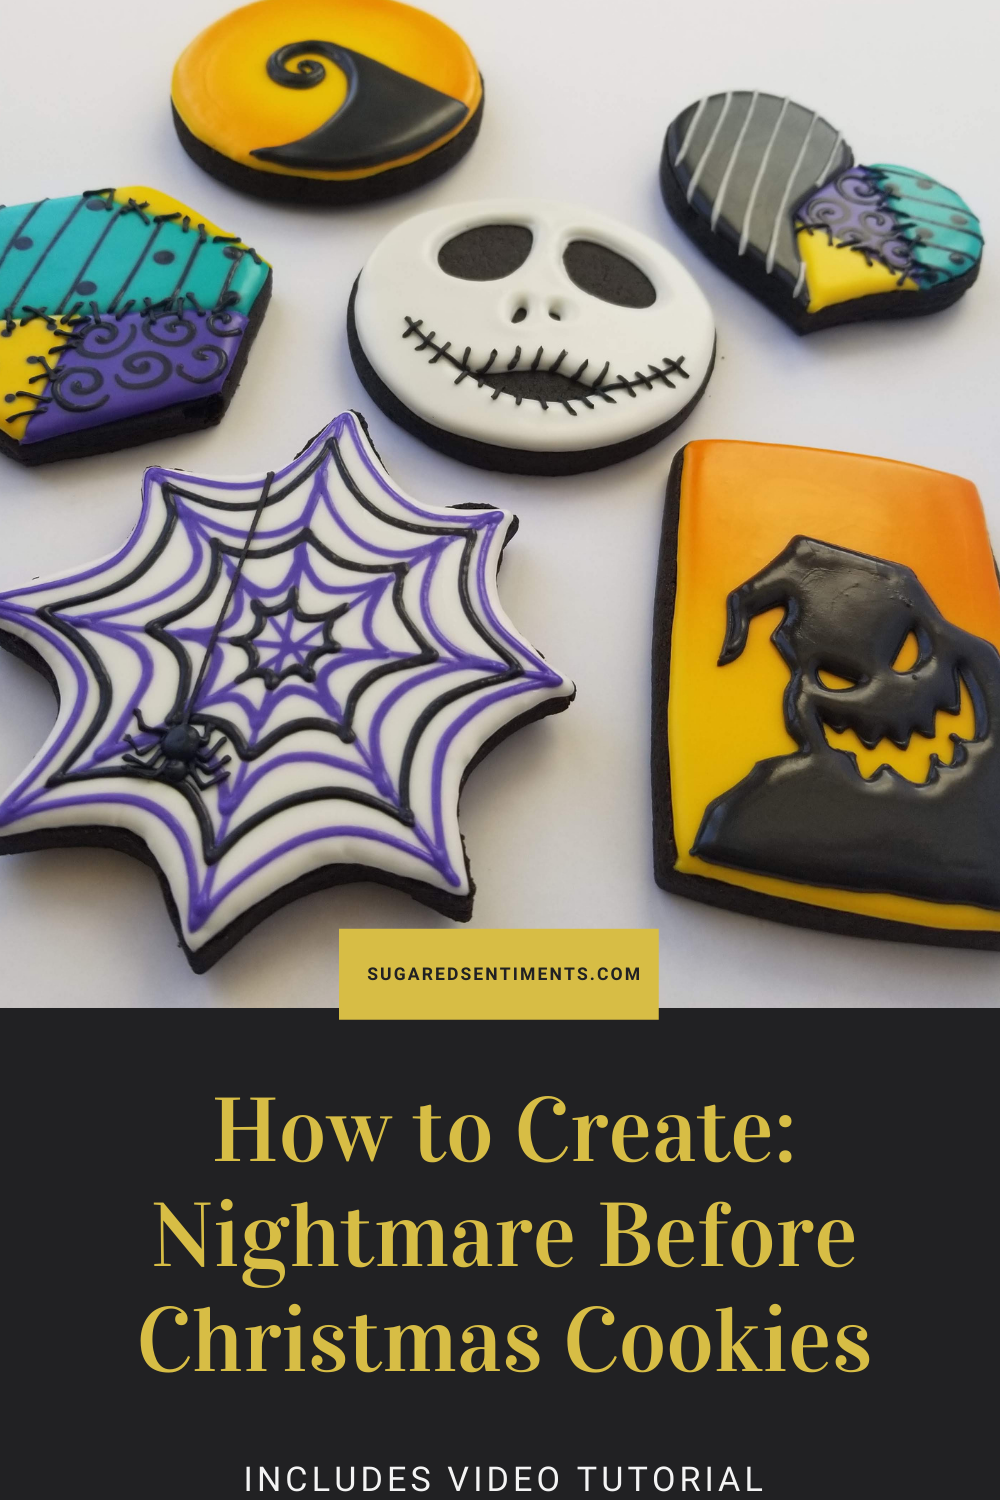 Create 6 Nightmare Before Christmas inspired cookies with the help of this guide and video tutorial